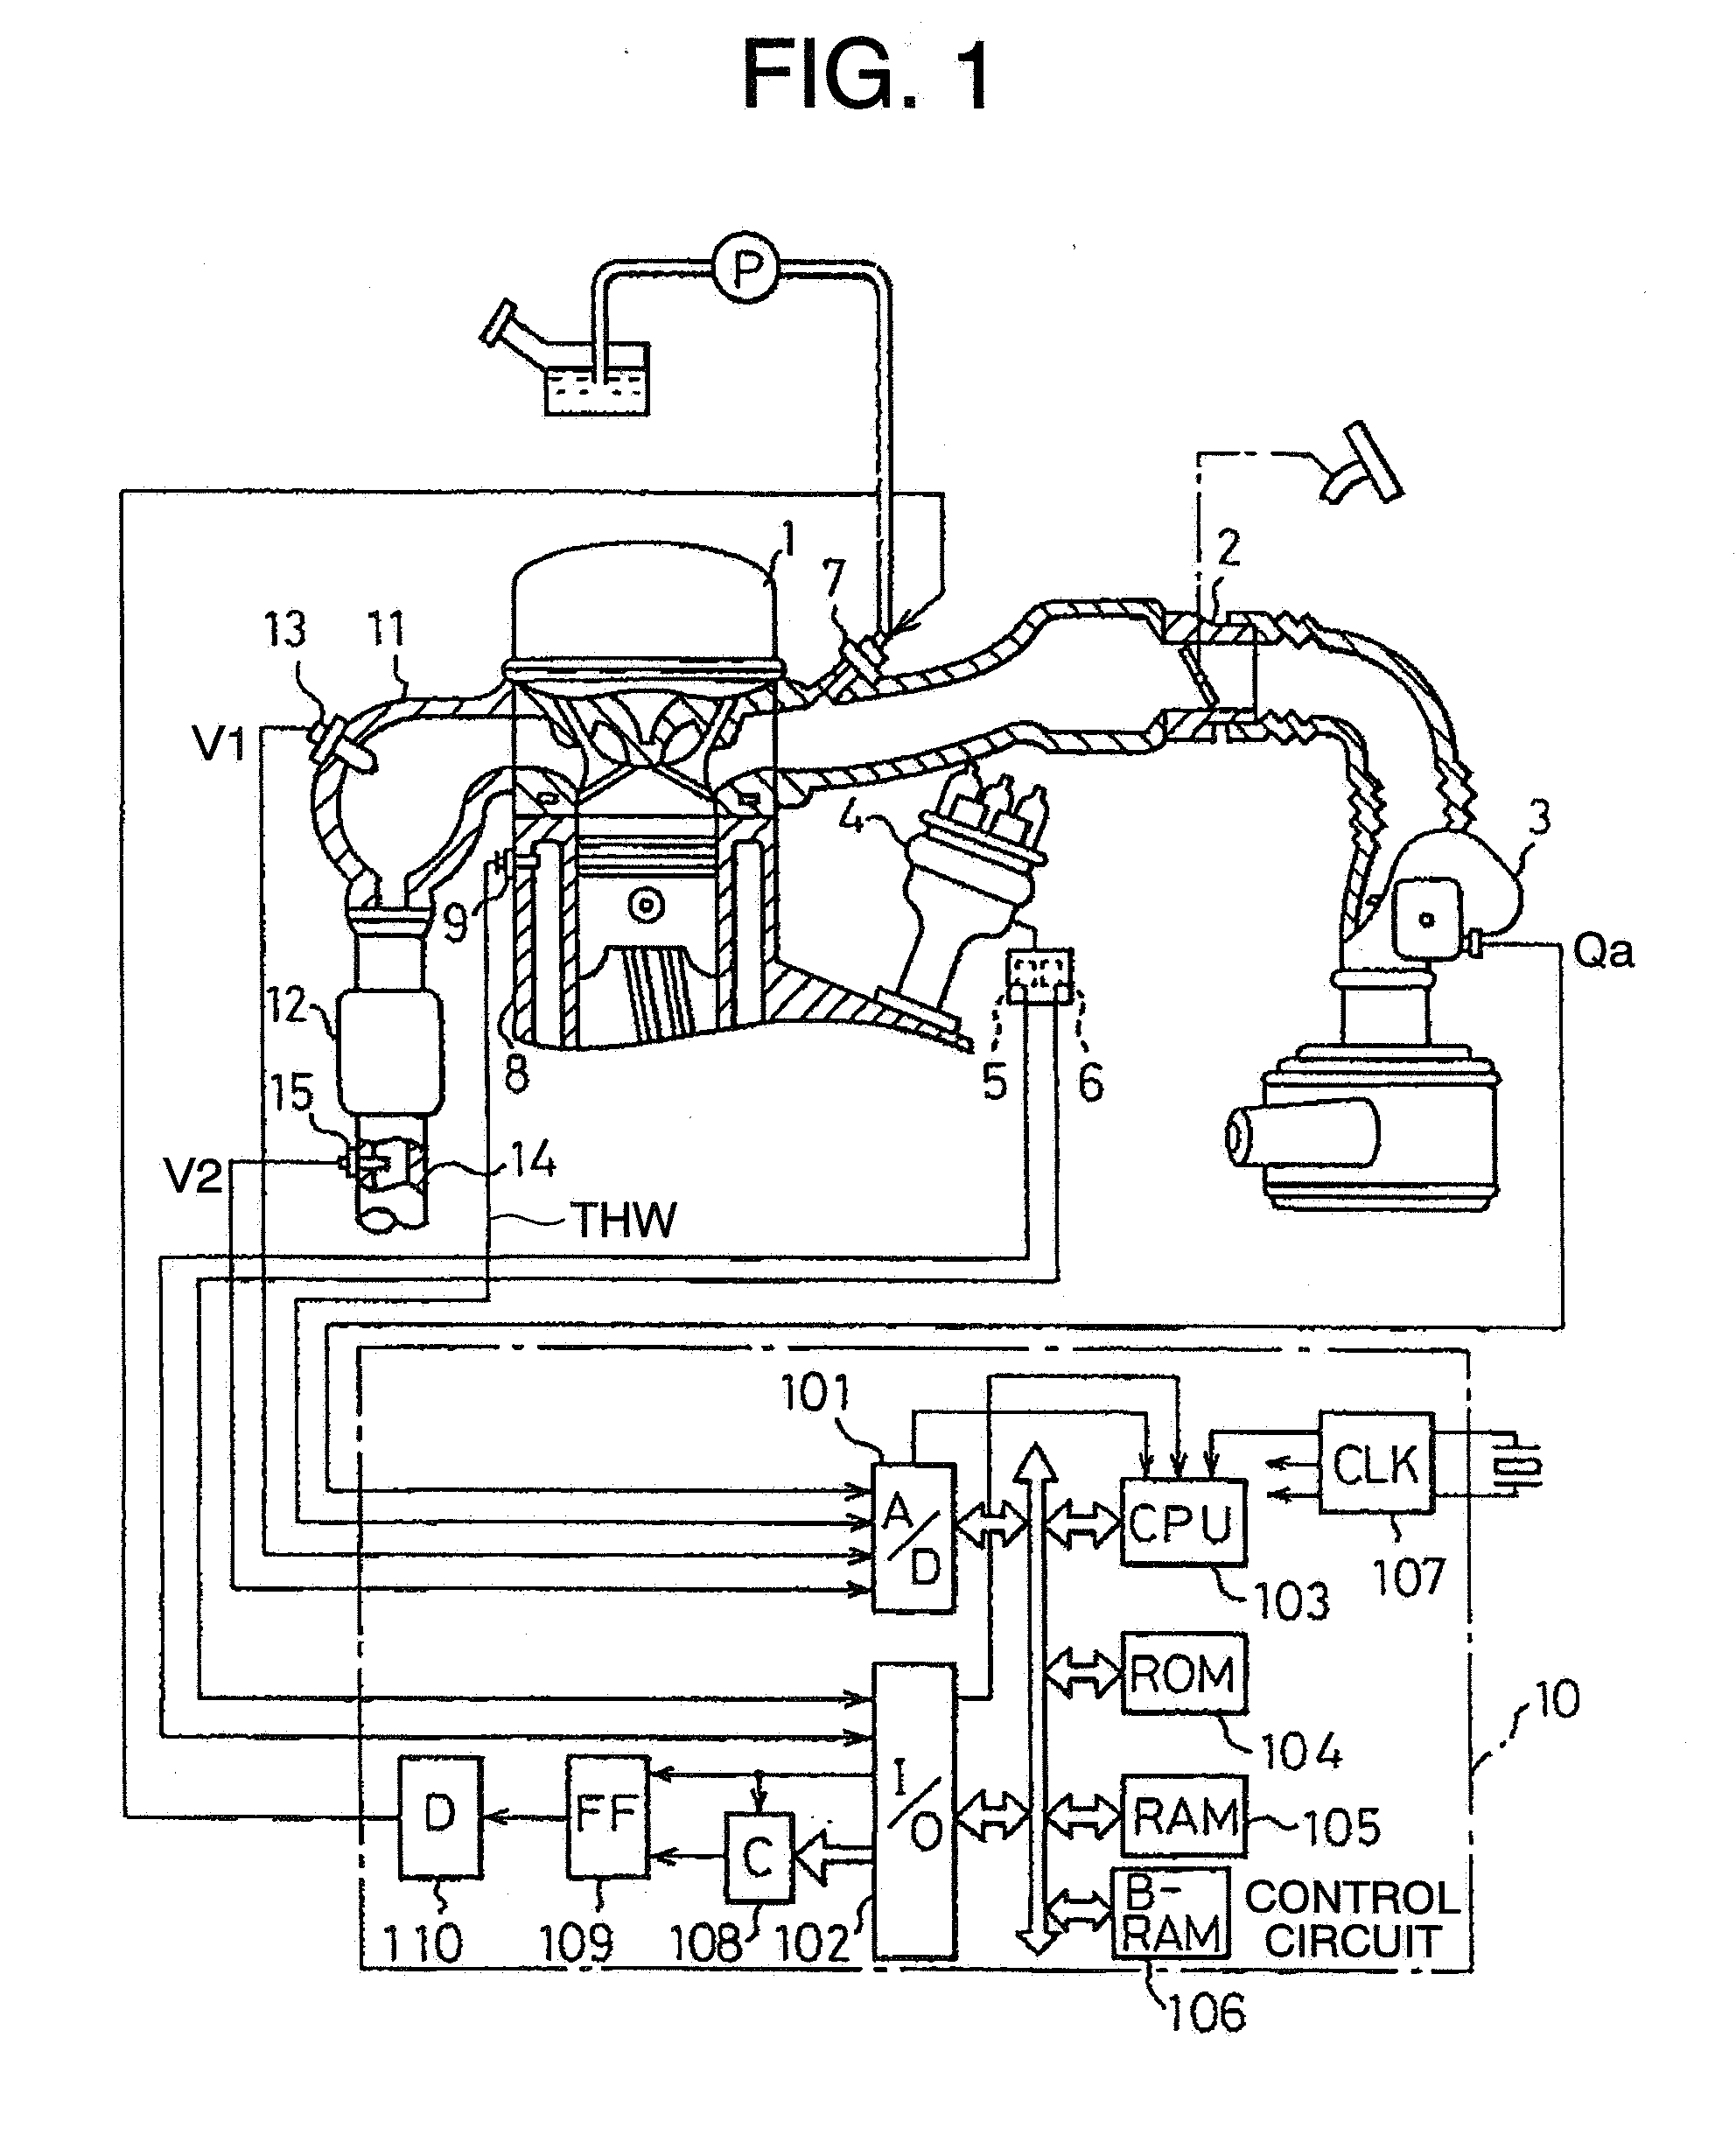 Air fuel ratio control apparatus for an internal combustion engine